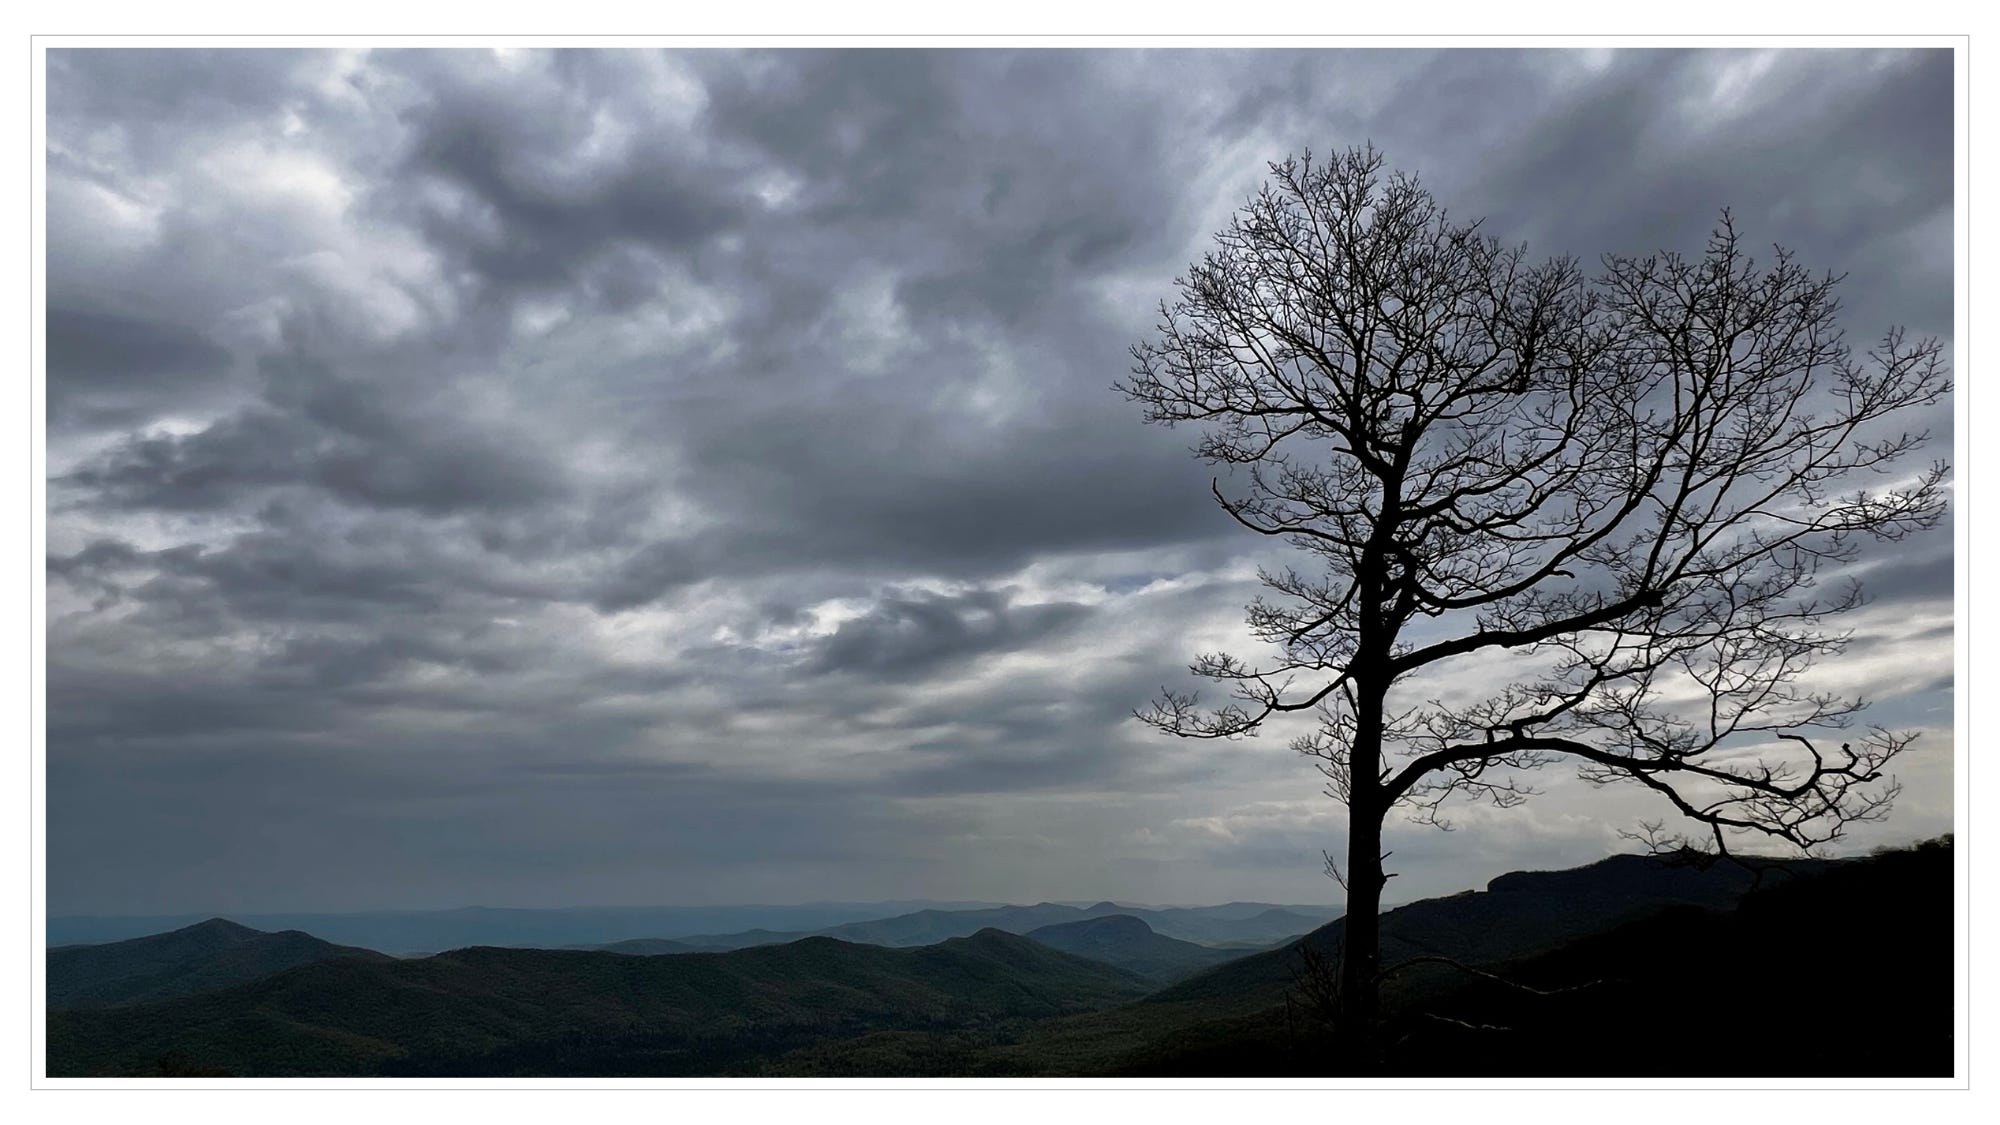 ridgetop tree towering over others, just barely budding, limbs outstretched toward dense clouds, dusk; mountain ridges in the distance